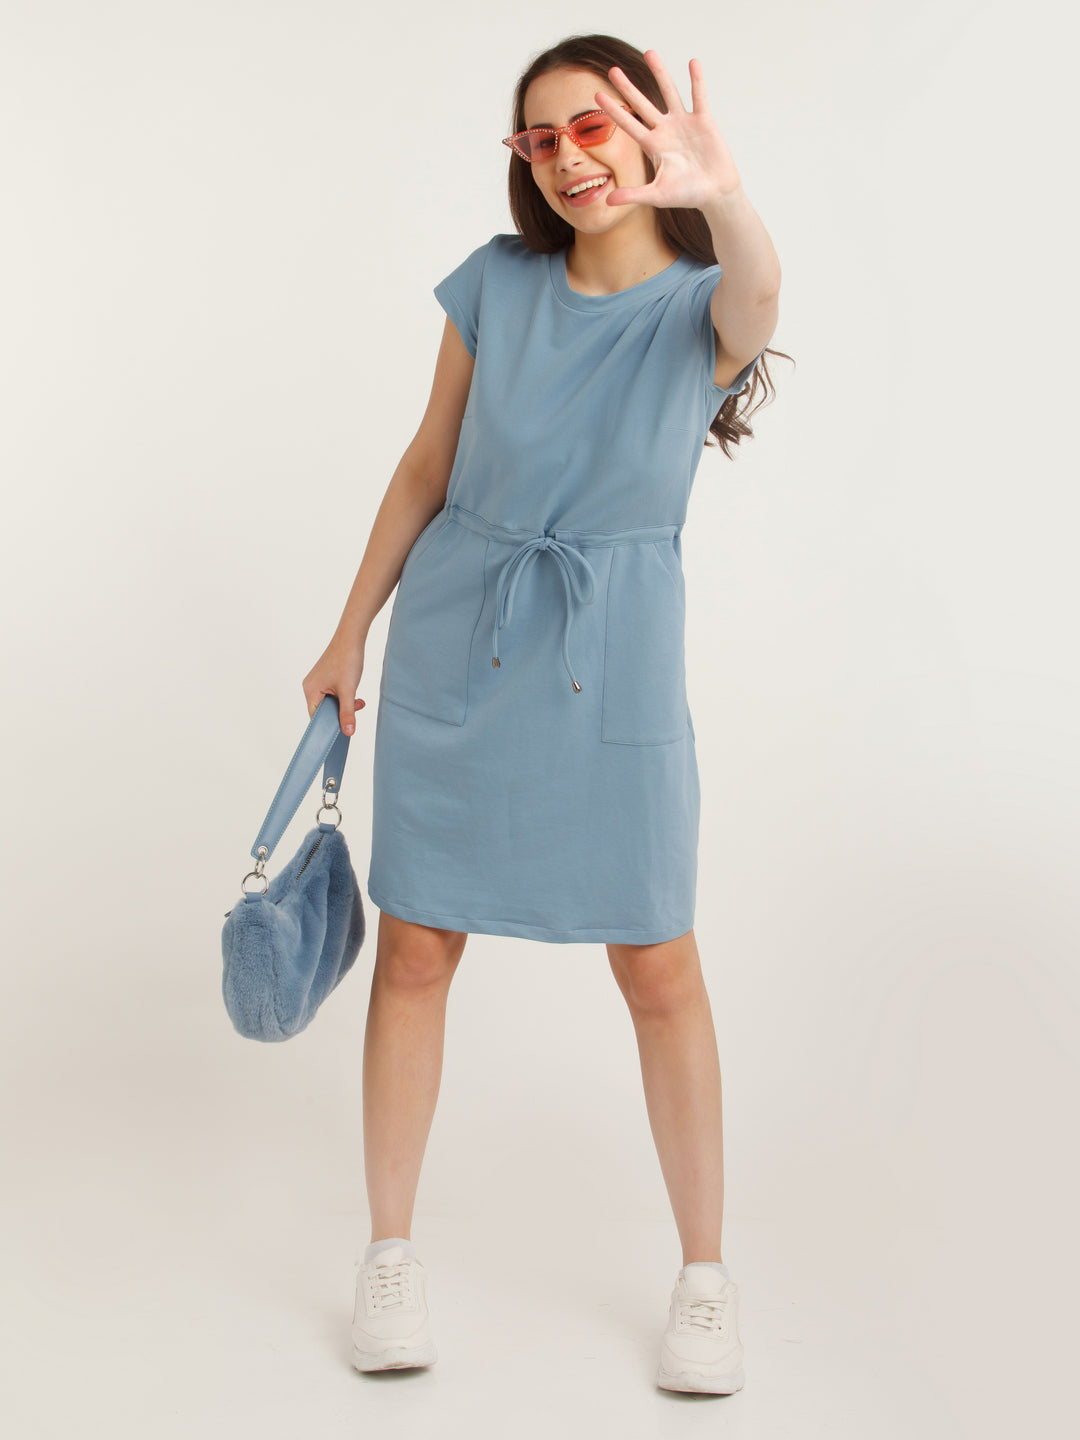 Blue Solid Tie-Up Short Dress For Women